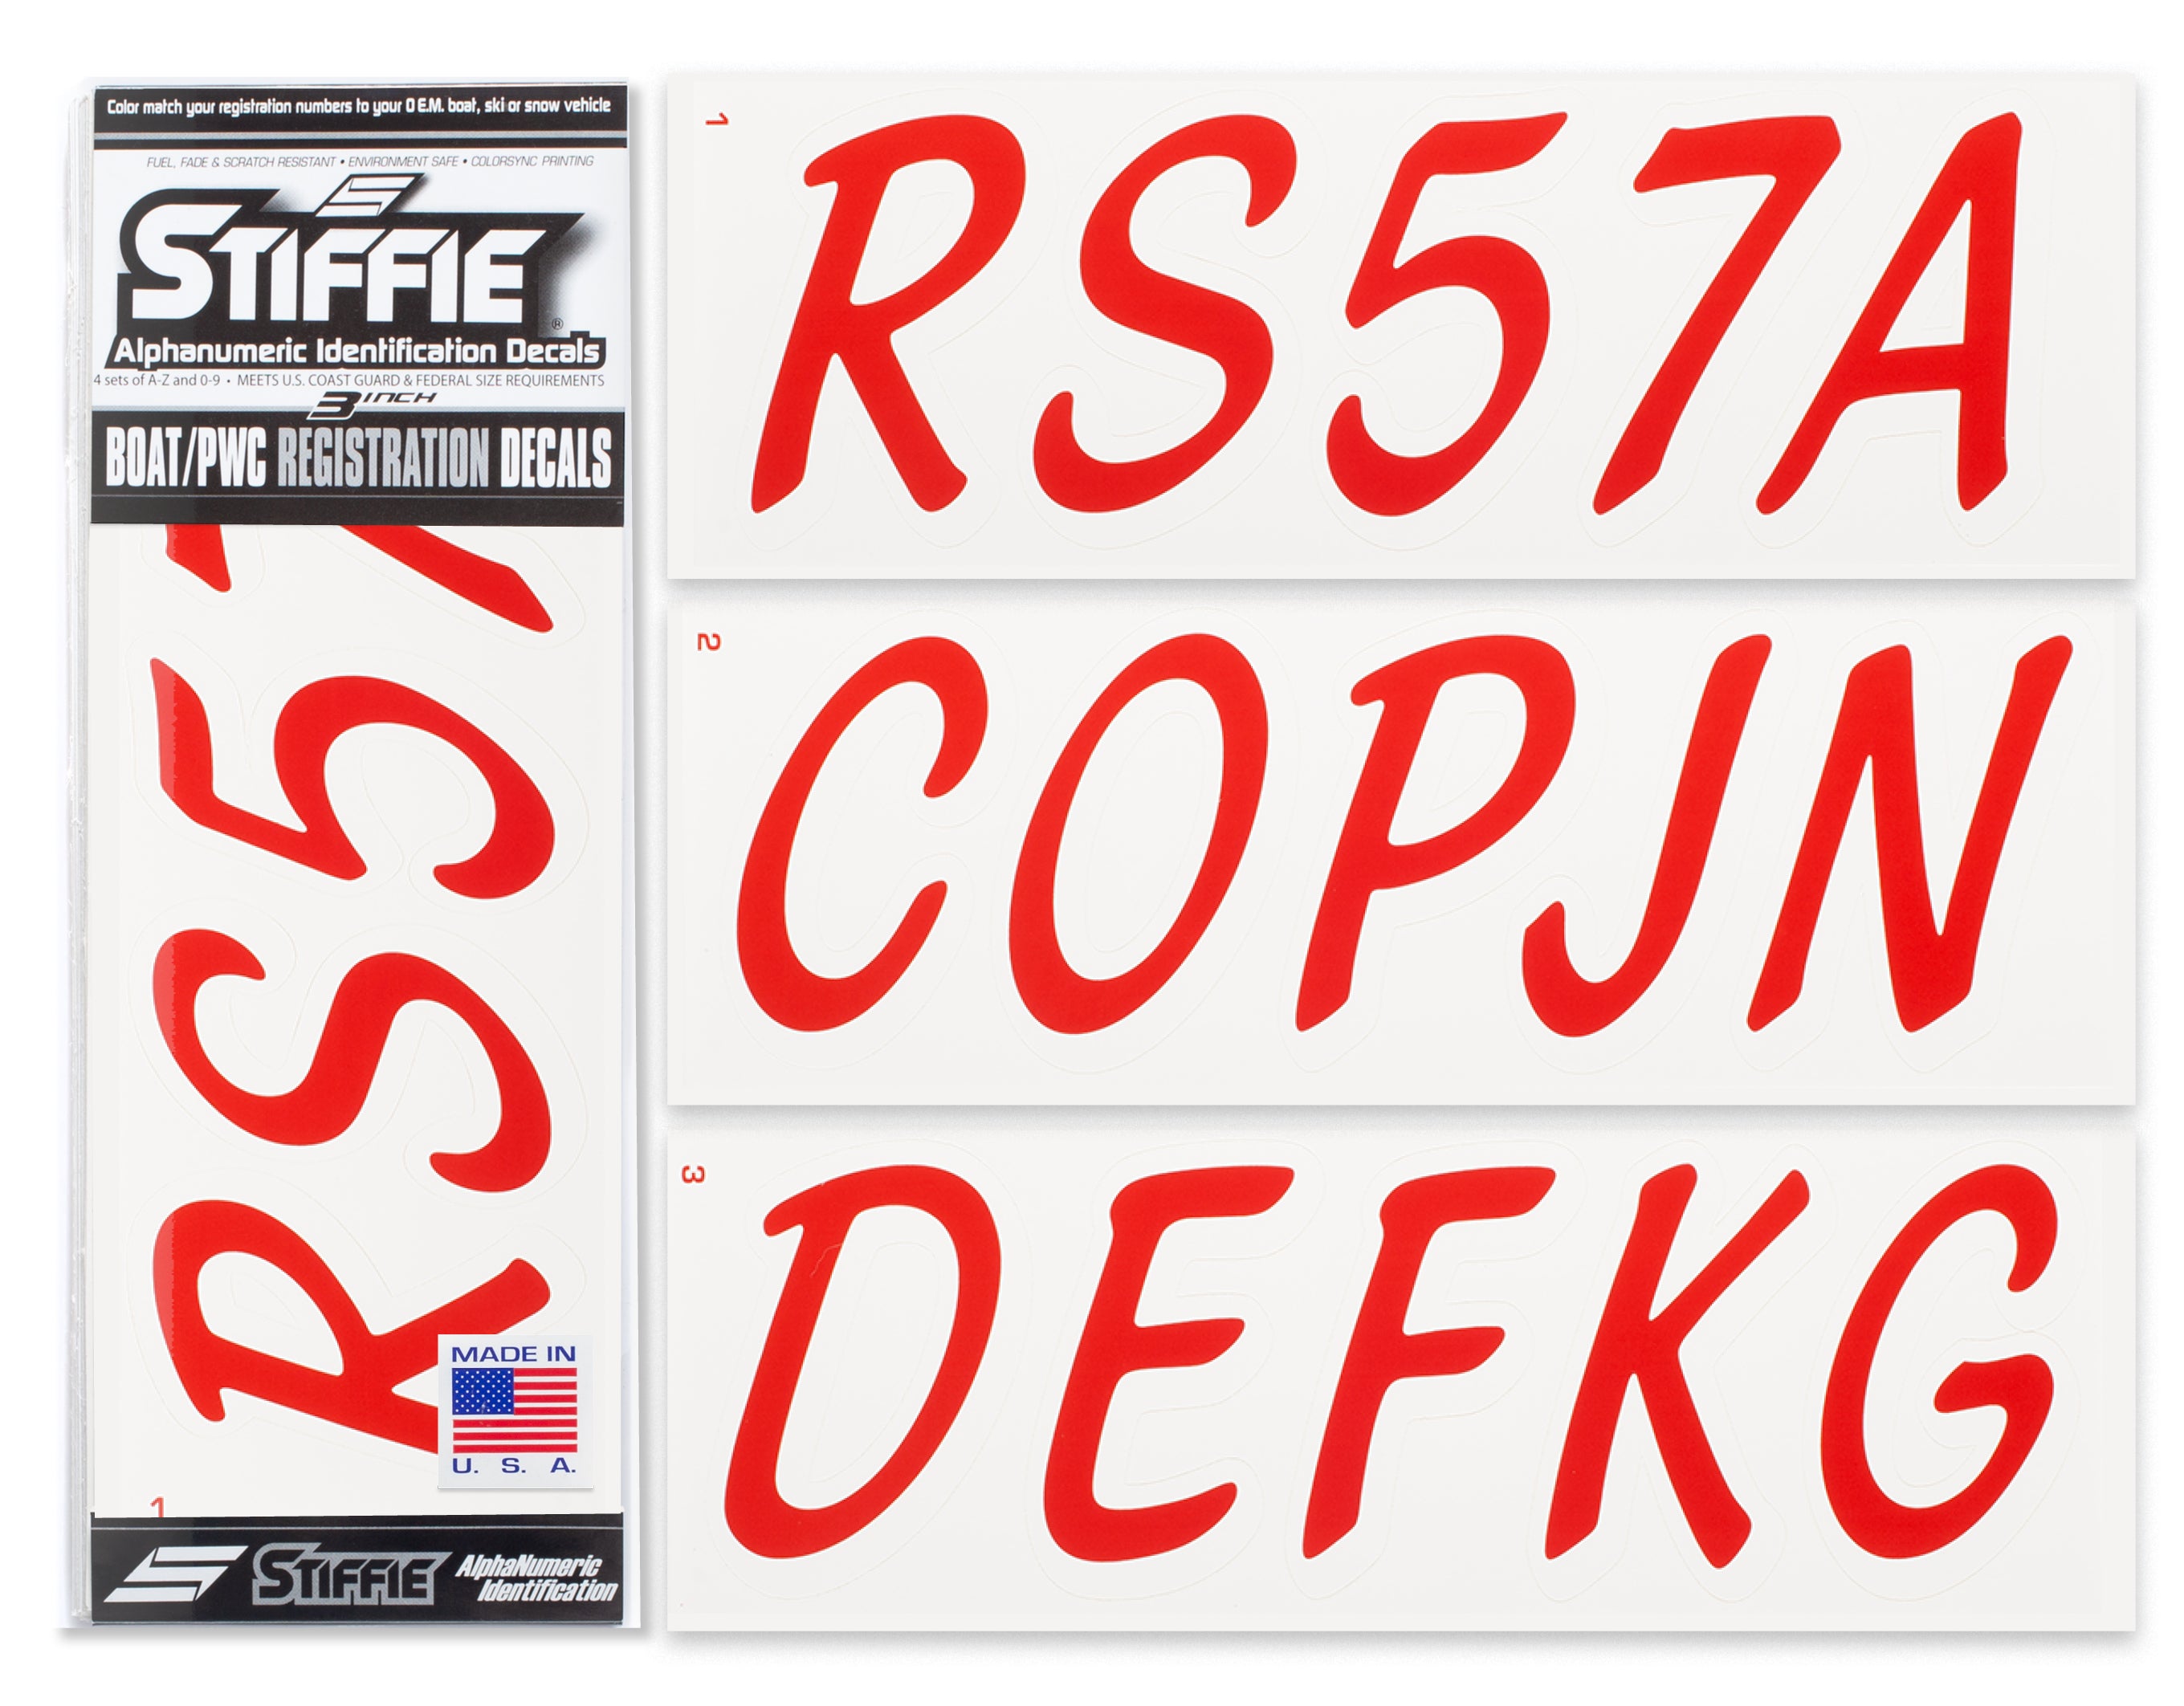 STIFFIE Whipline Solid Red/White 3" Alpha-Numeric Registration Identification Numbers Stickers Decals for Boats & Personal Watercraft